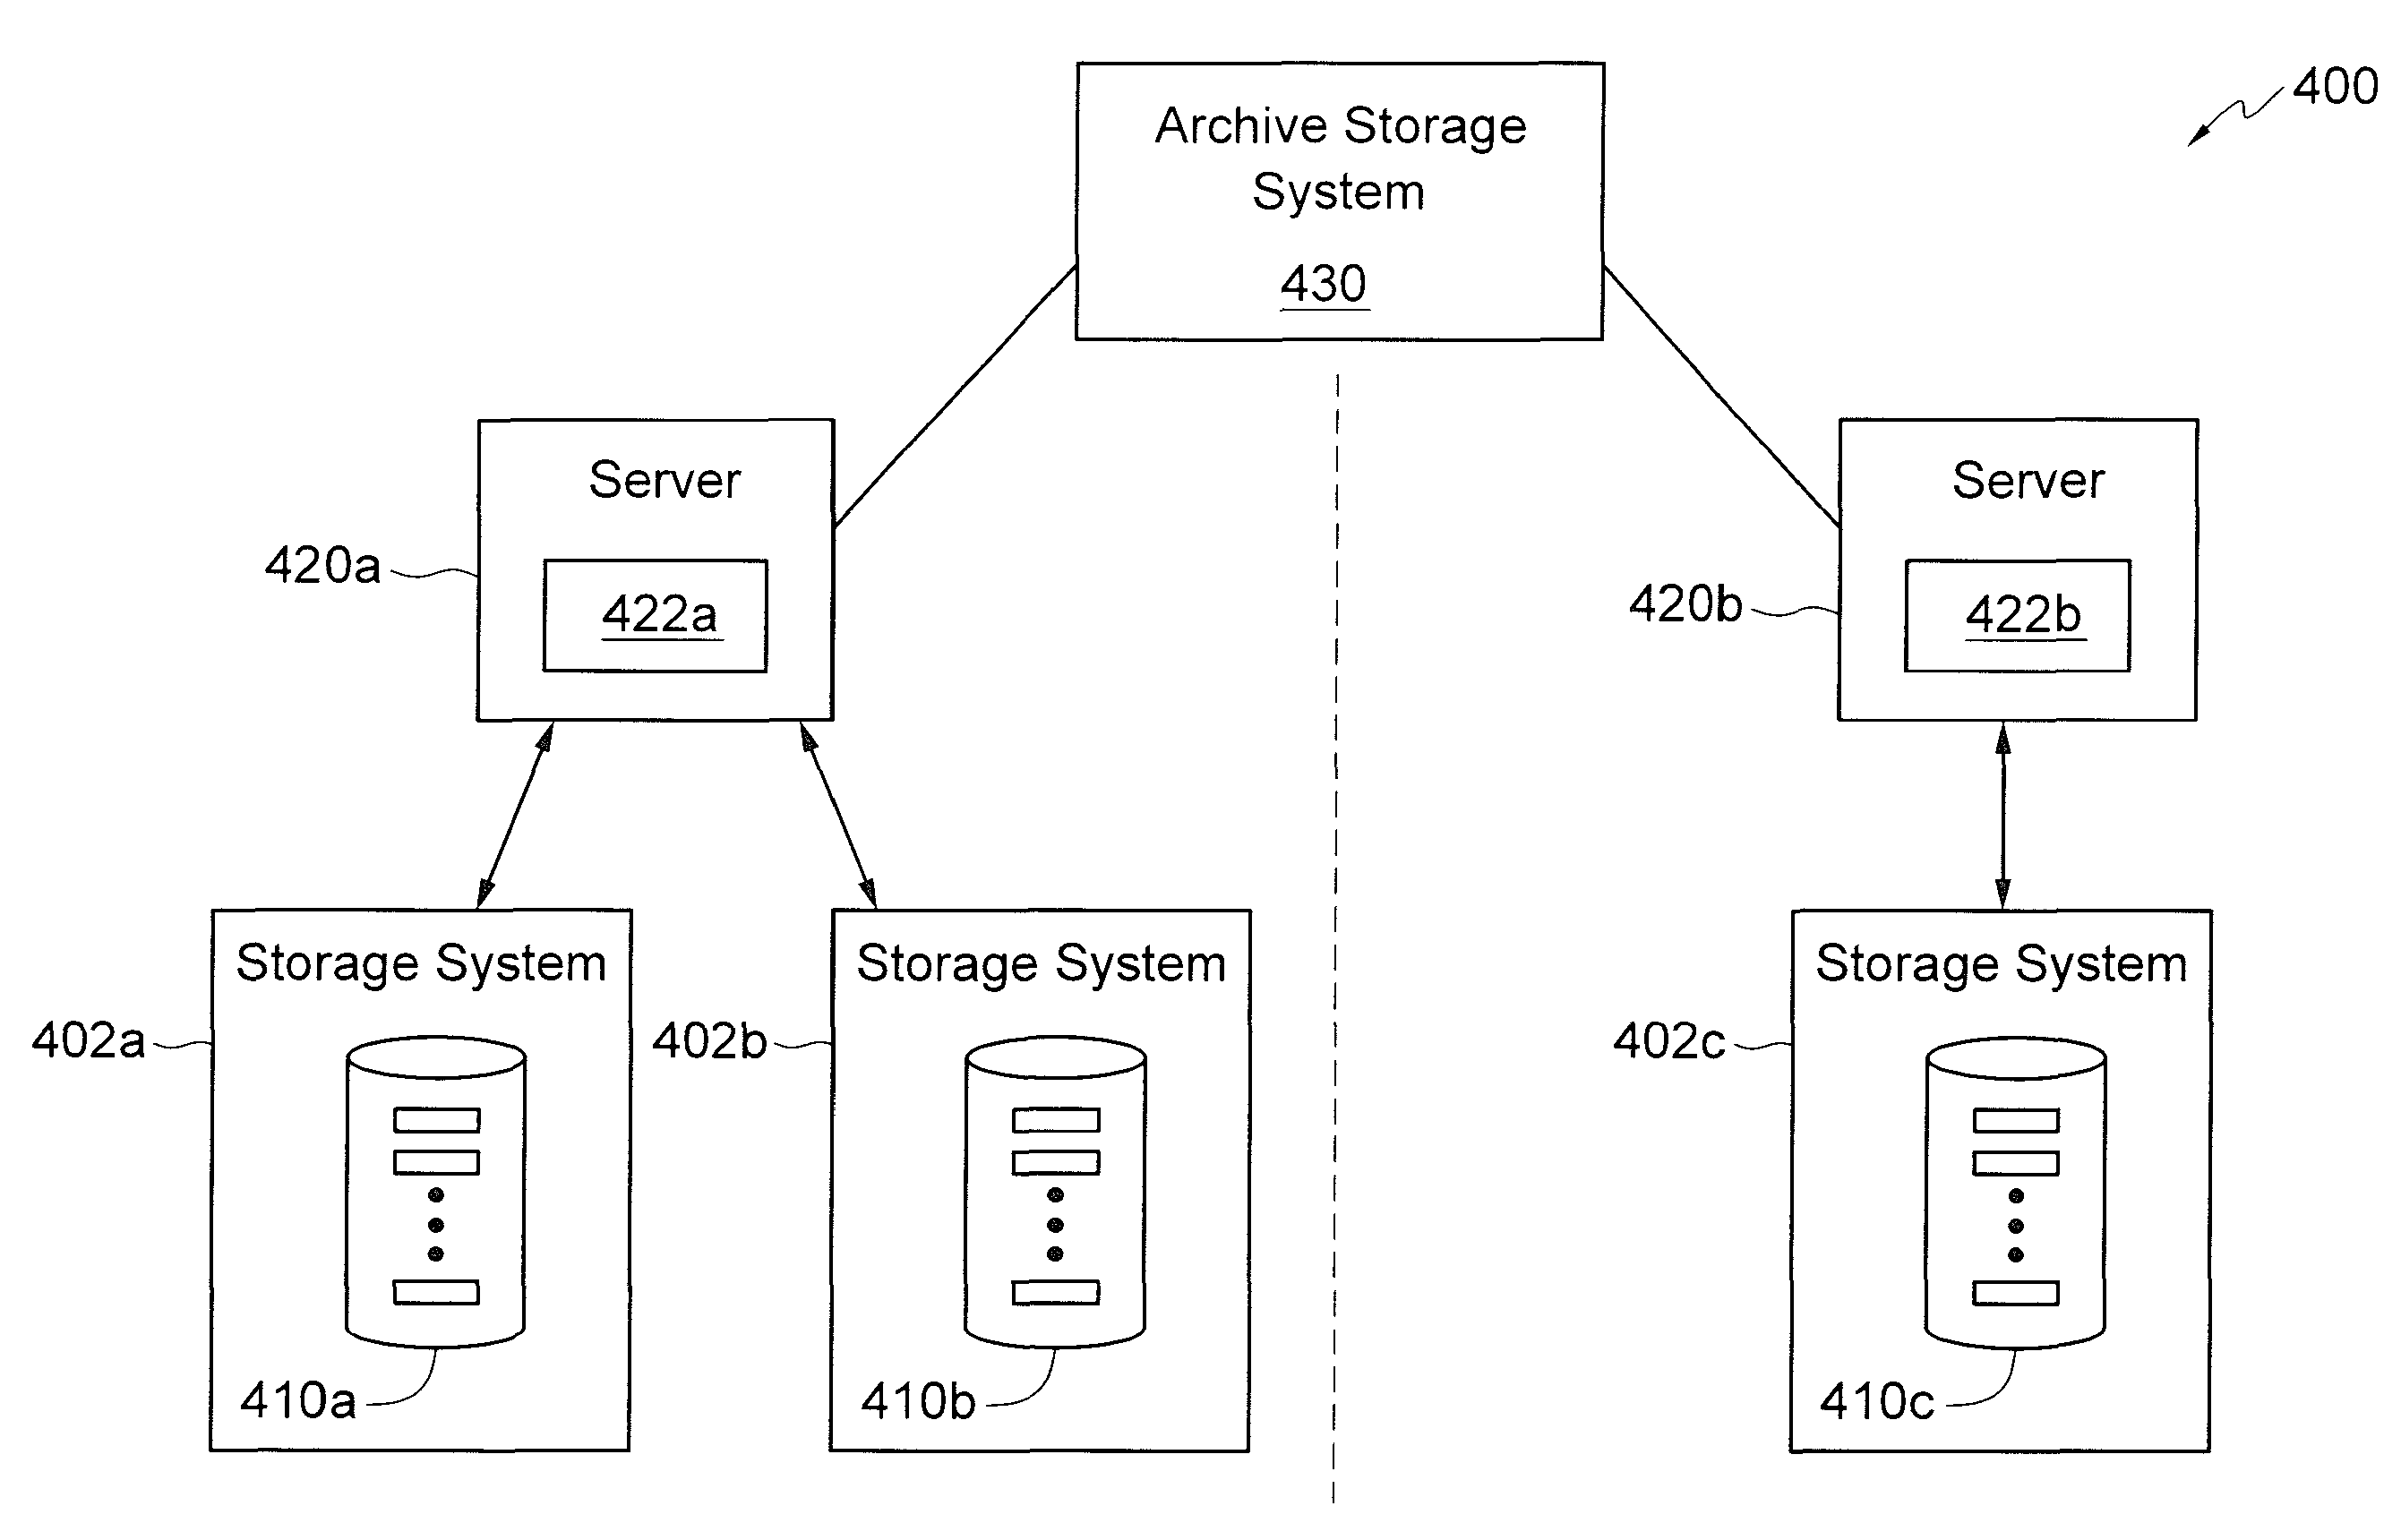 High-availability file archiving